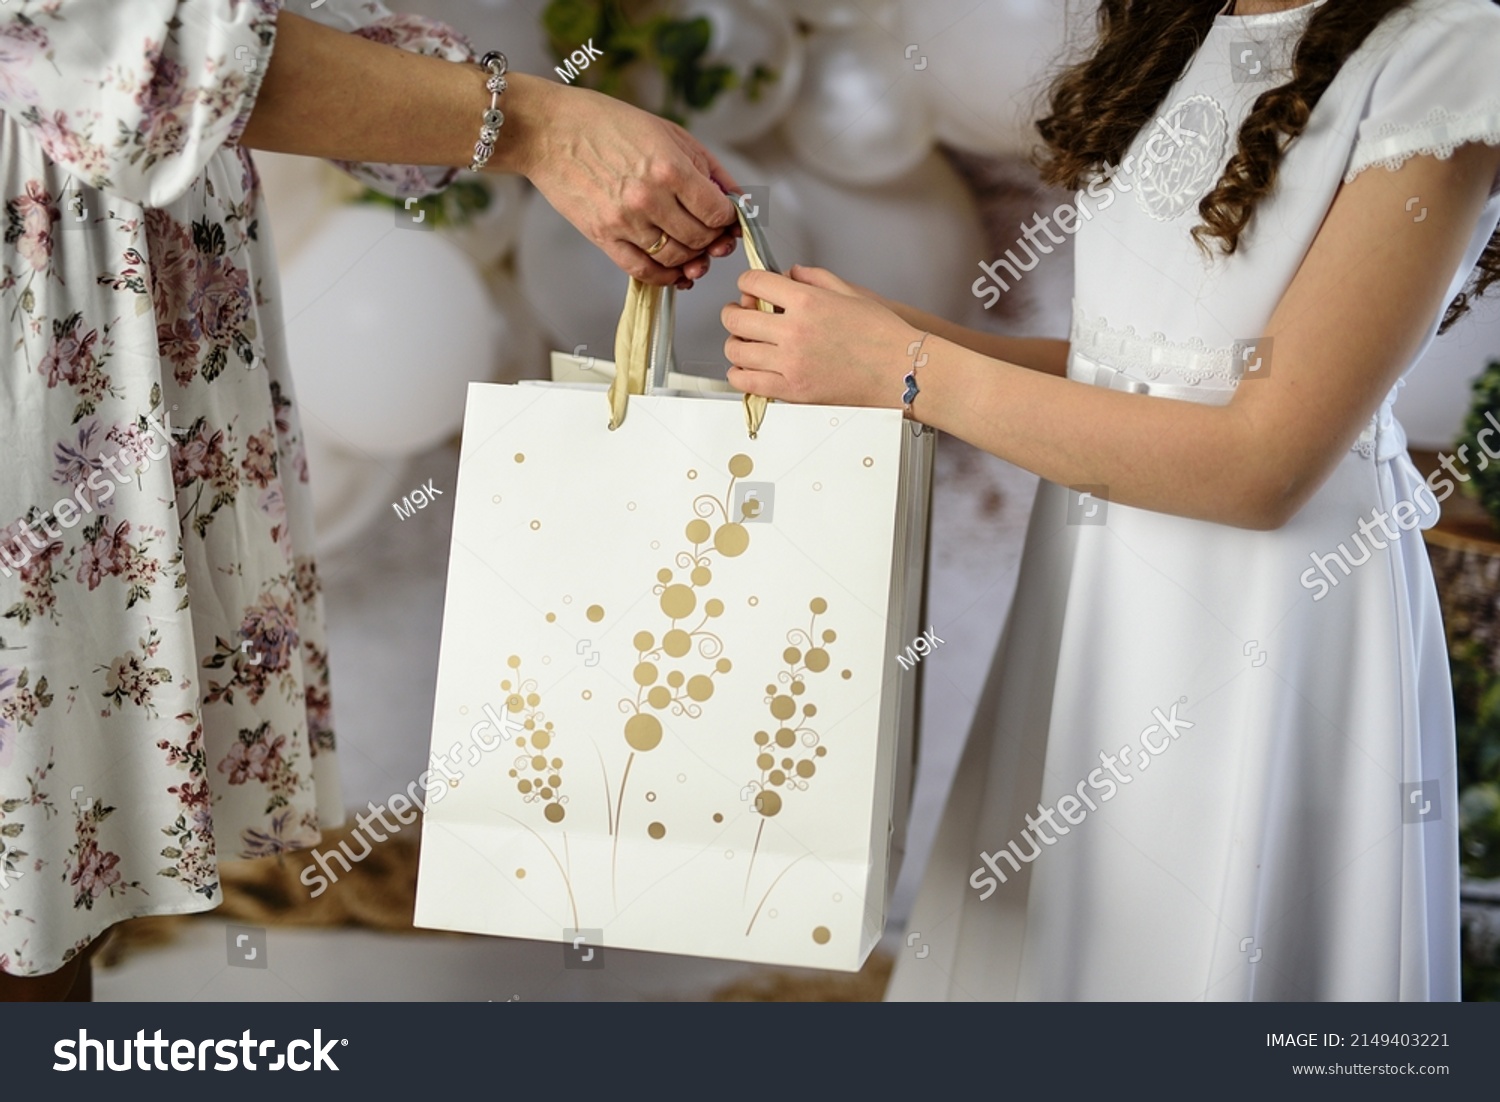 A gift from godparents for the first holy communion. A woman giving the girl a First Communion gift. First Communion gifts in decorative bags. #2149403221